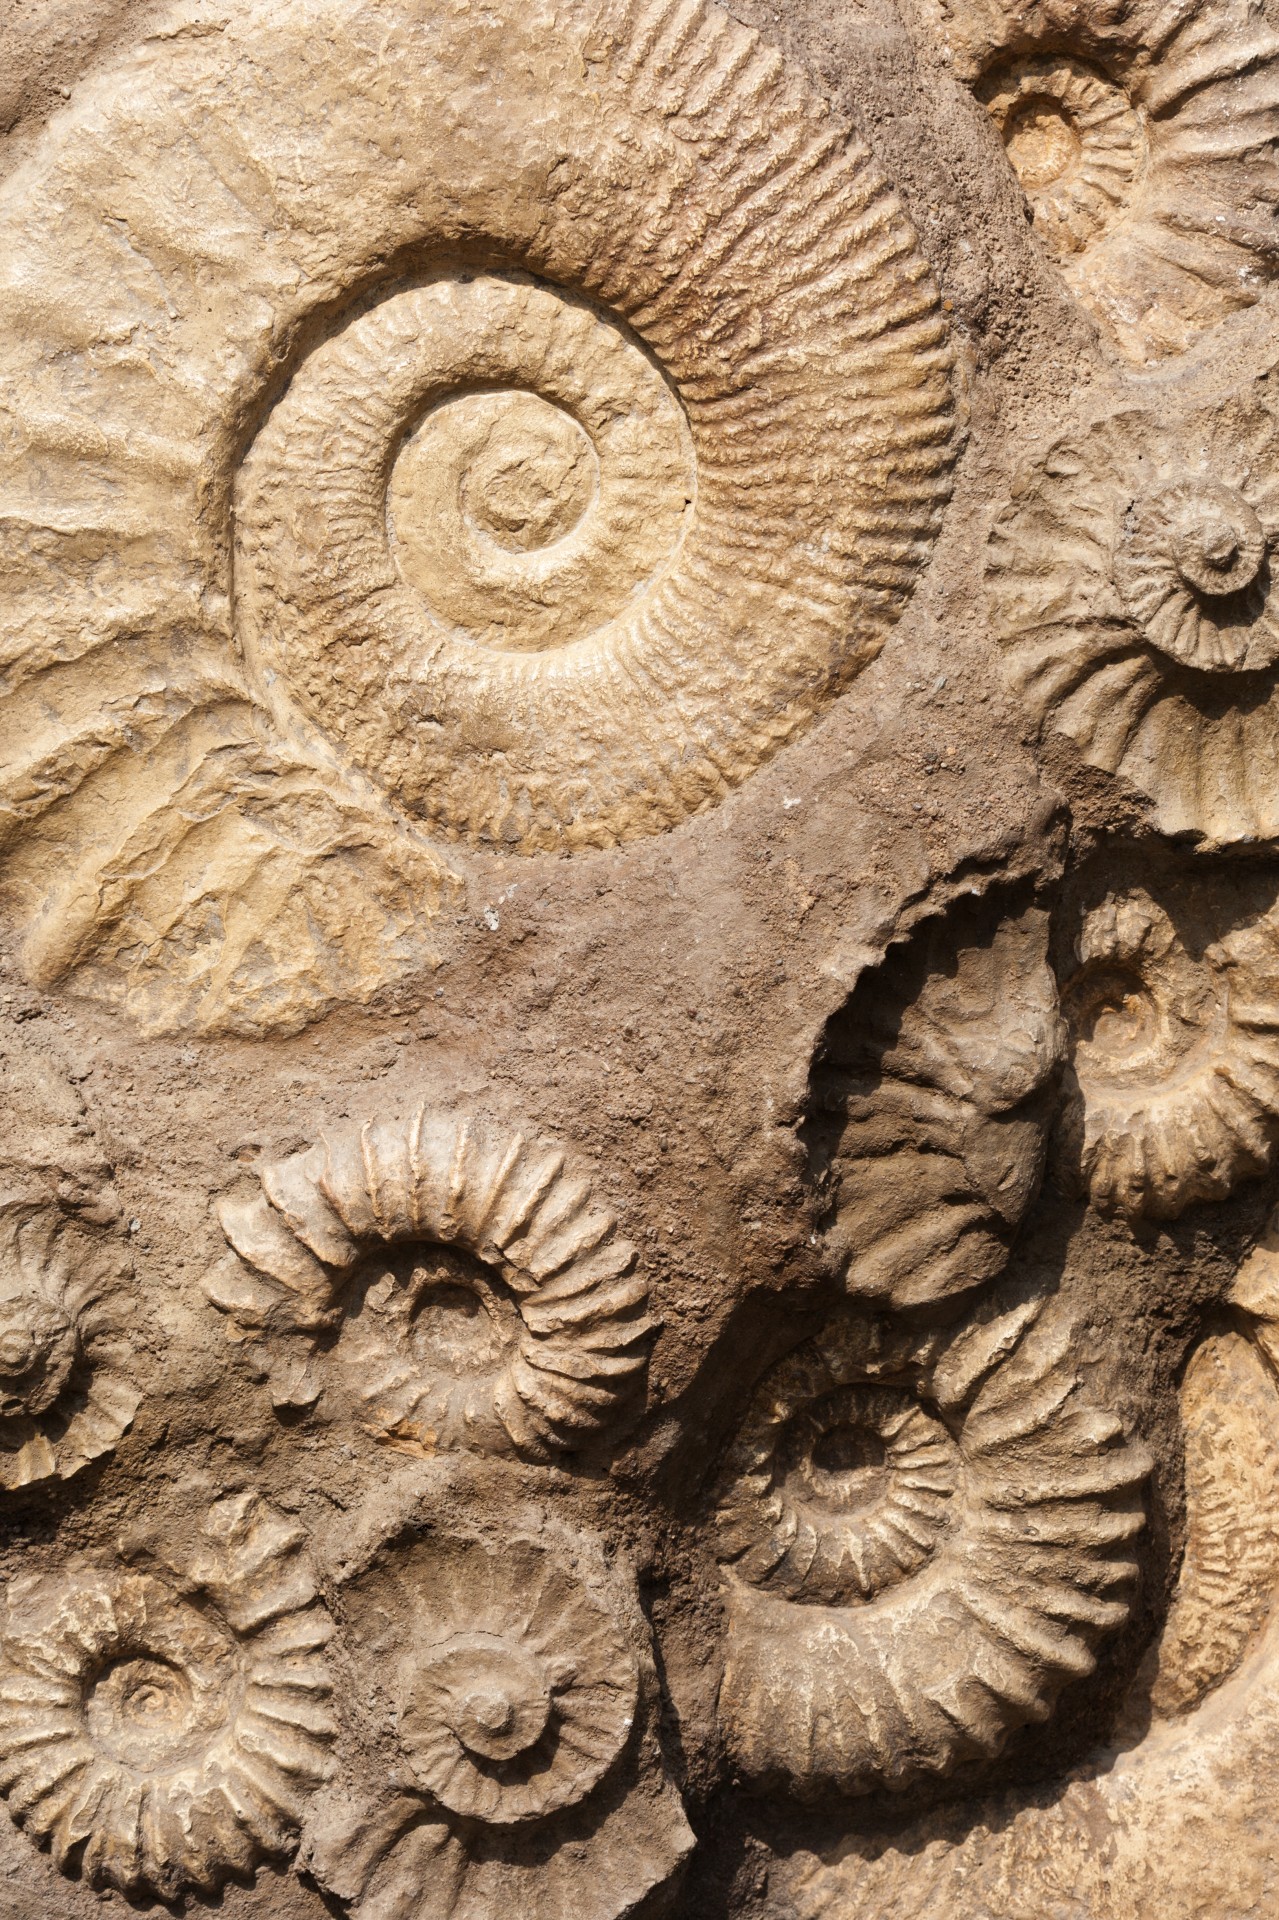 shell-fossils-free-stock-photo-public-domain-pictures